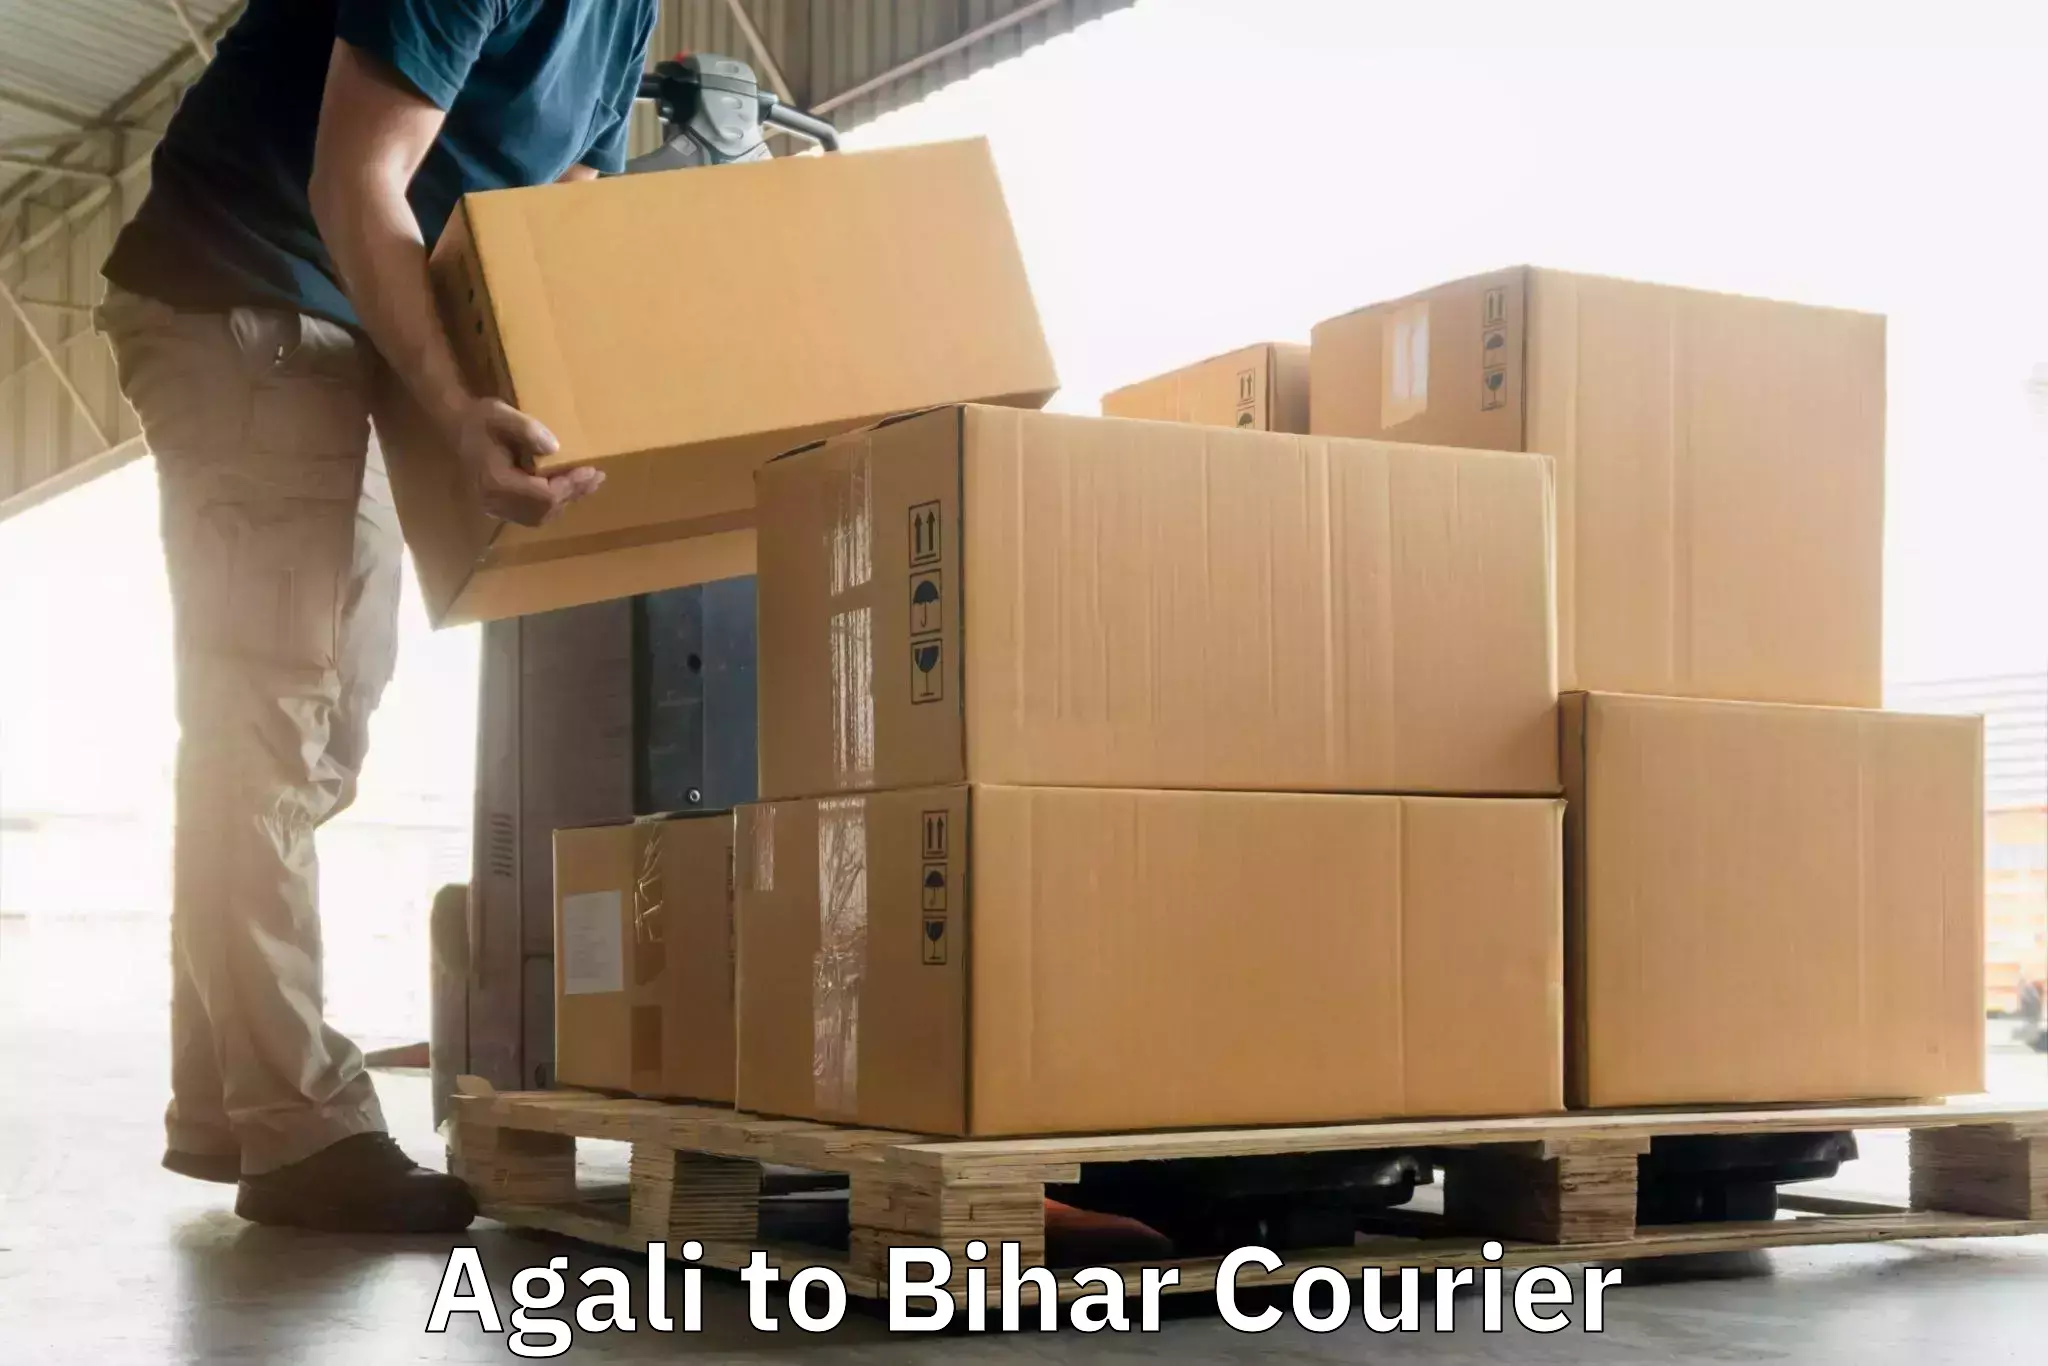 Global shipping networks Agali to Birpur